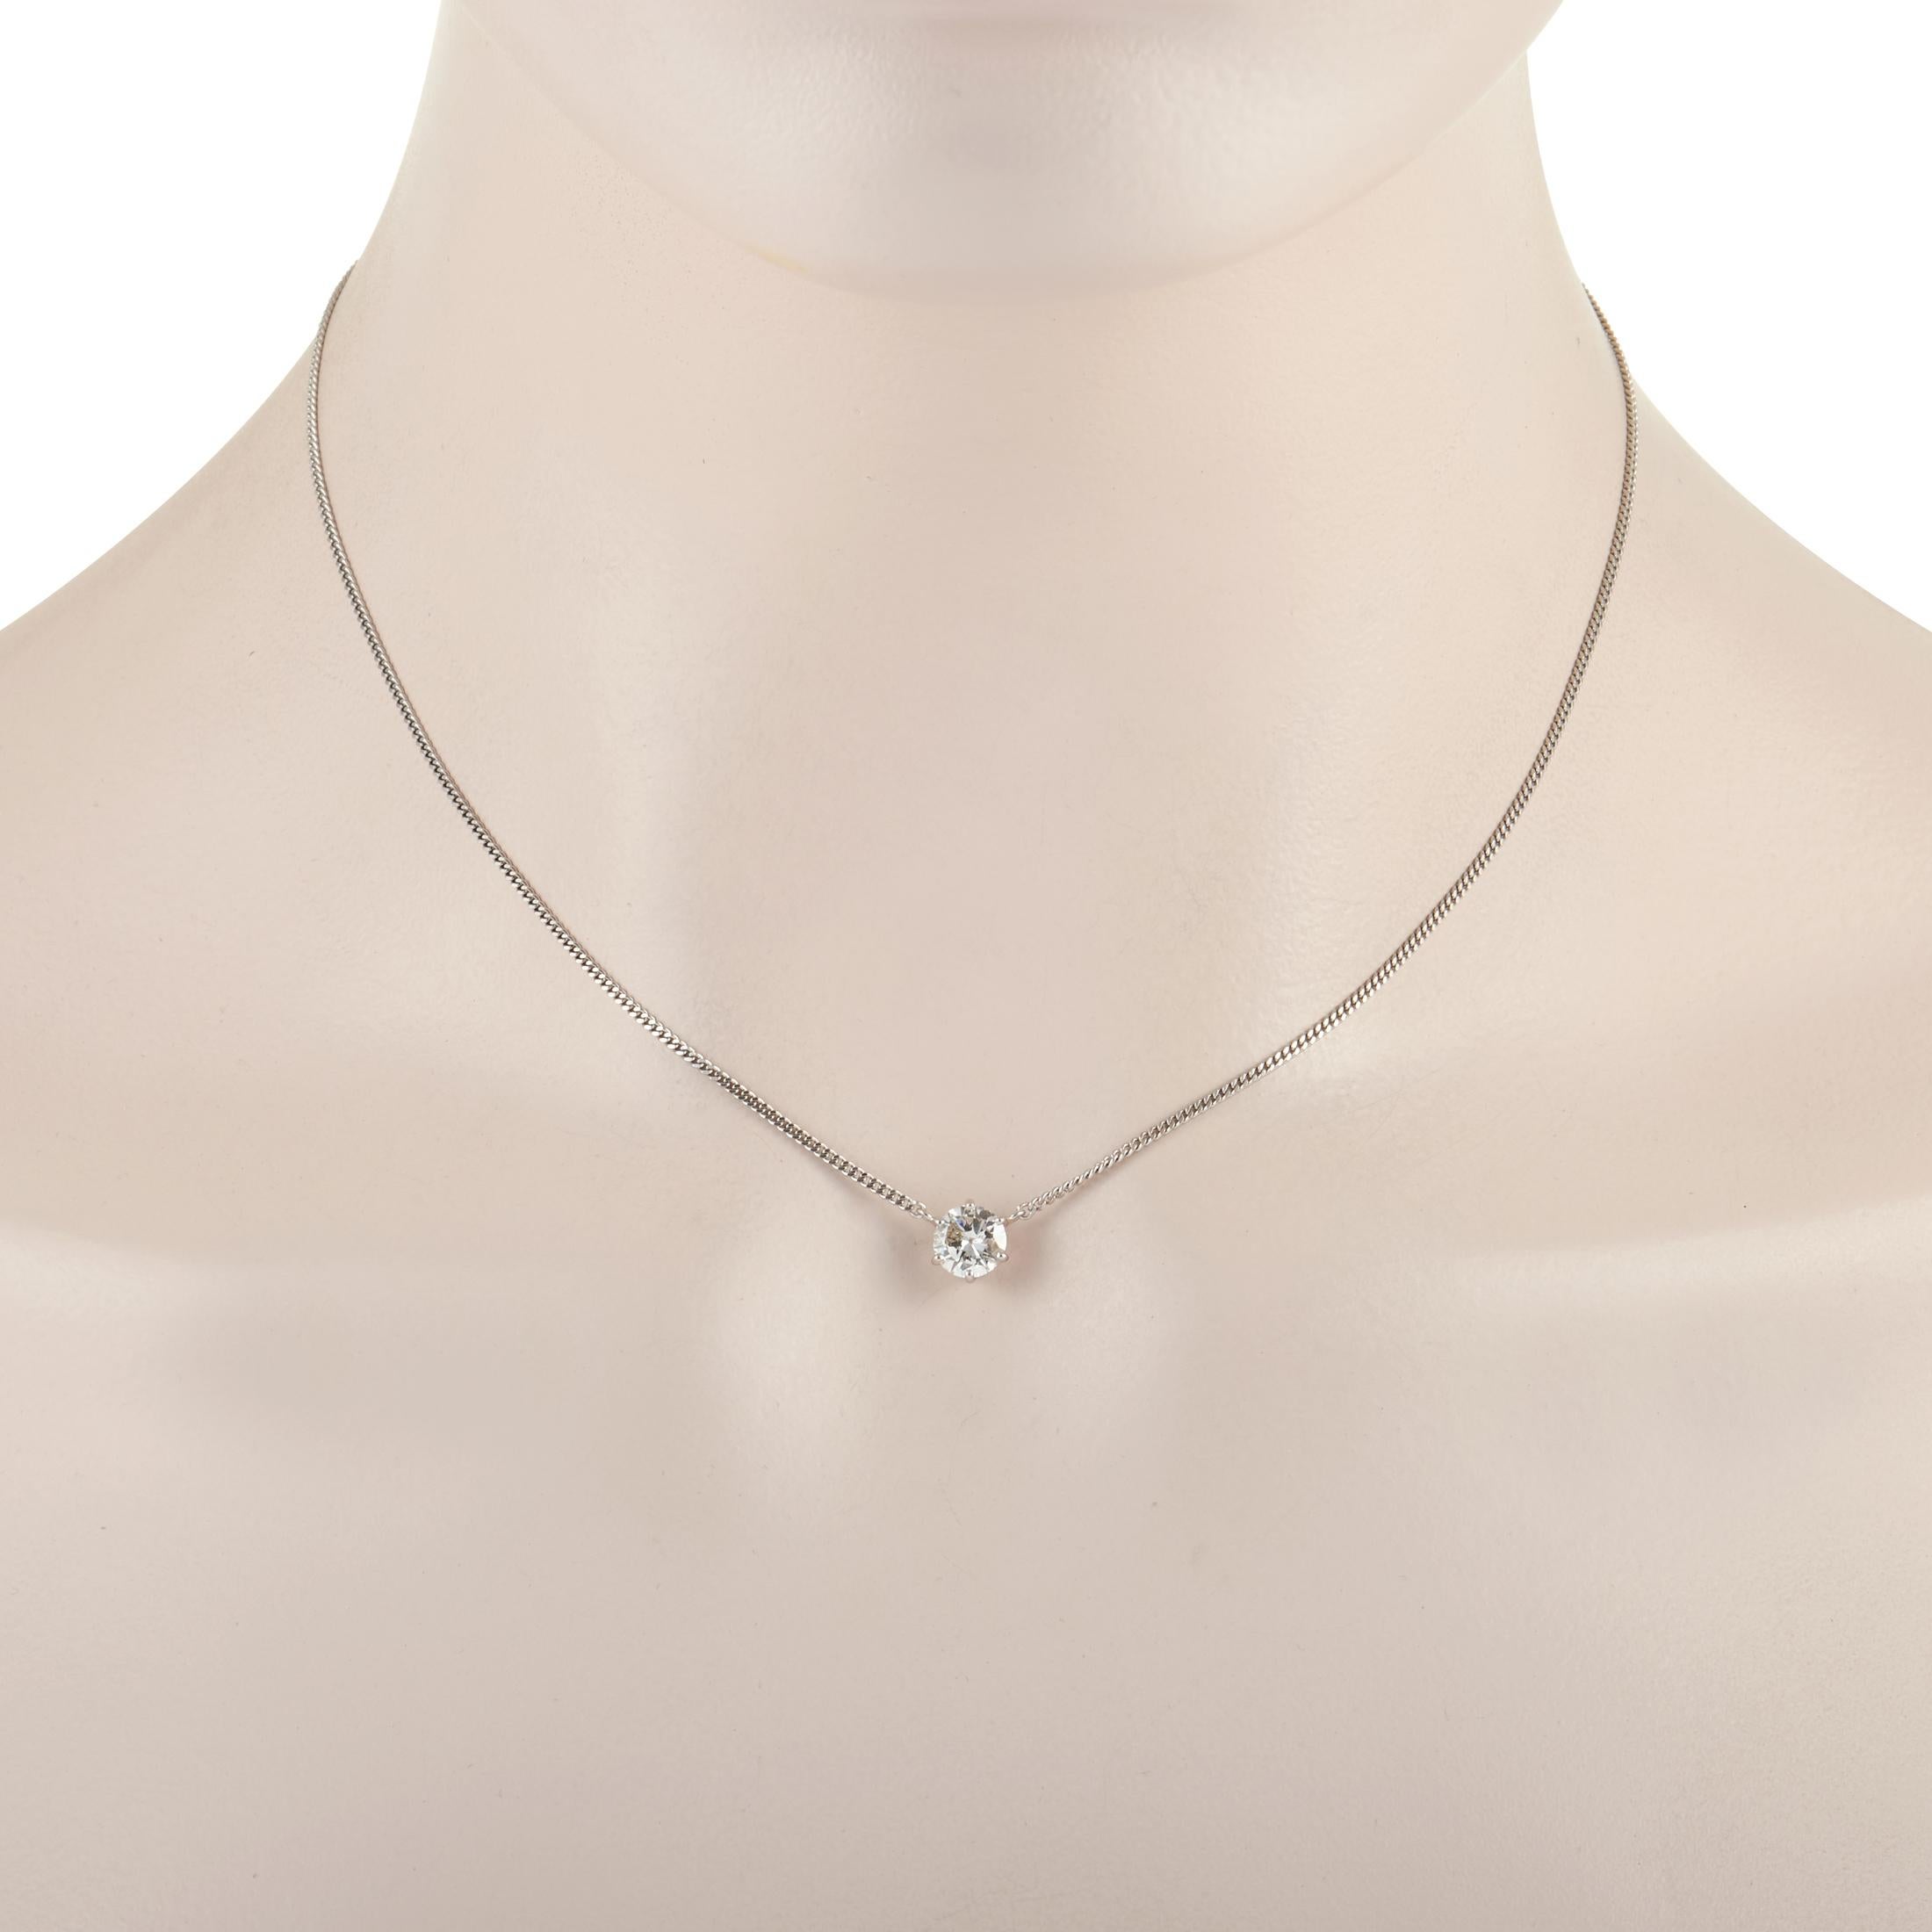 This diamond pendant necklace proves that simplicity never goes out of style. A single sparkling round-cut 1.01 carat diamond with J color and I1 clarity sparkles from its place at the center of this spectacular style. This pendant measures .25”